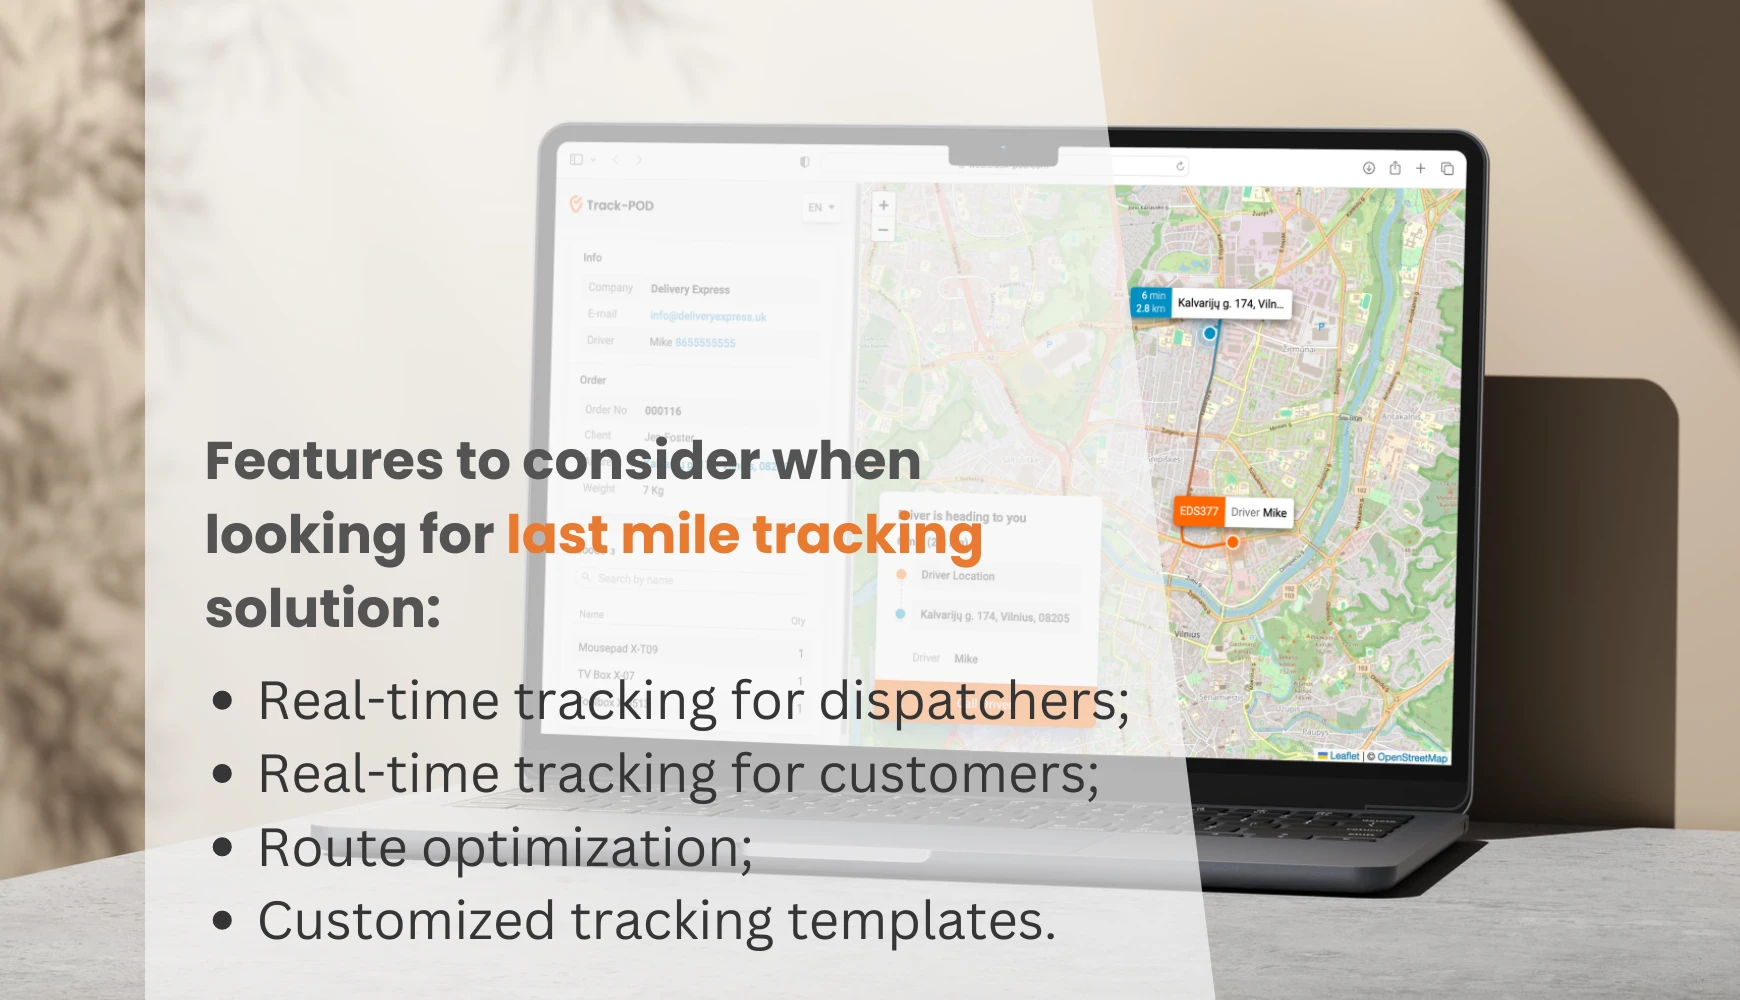 Features to consider when looking for last mile tracking solution 1